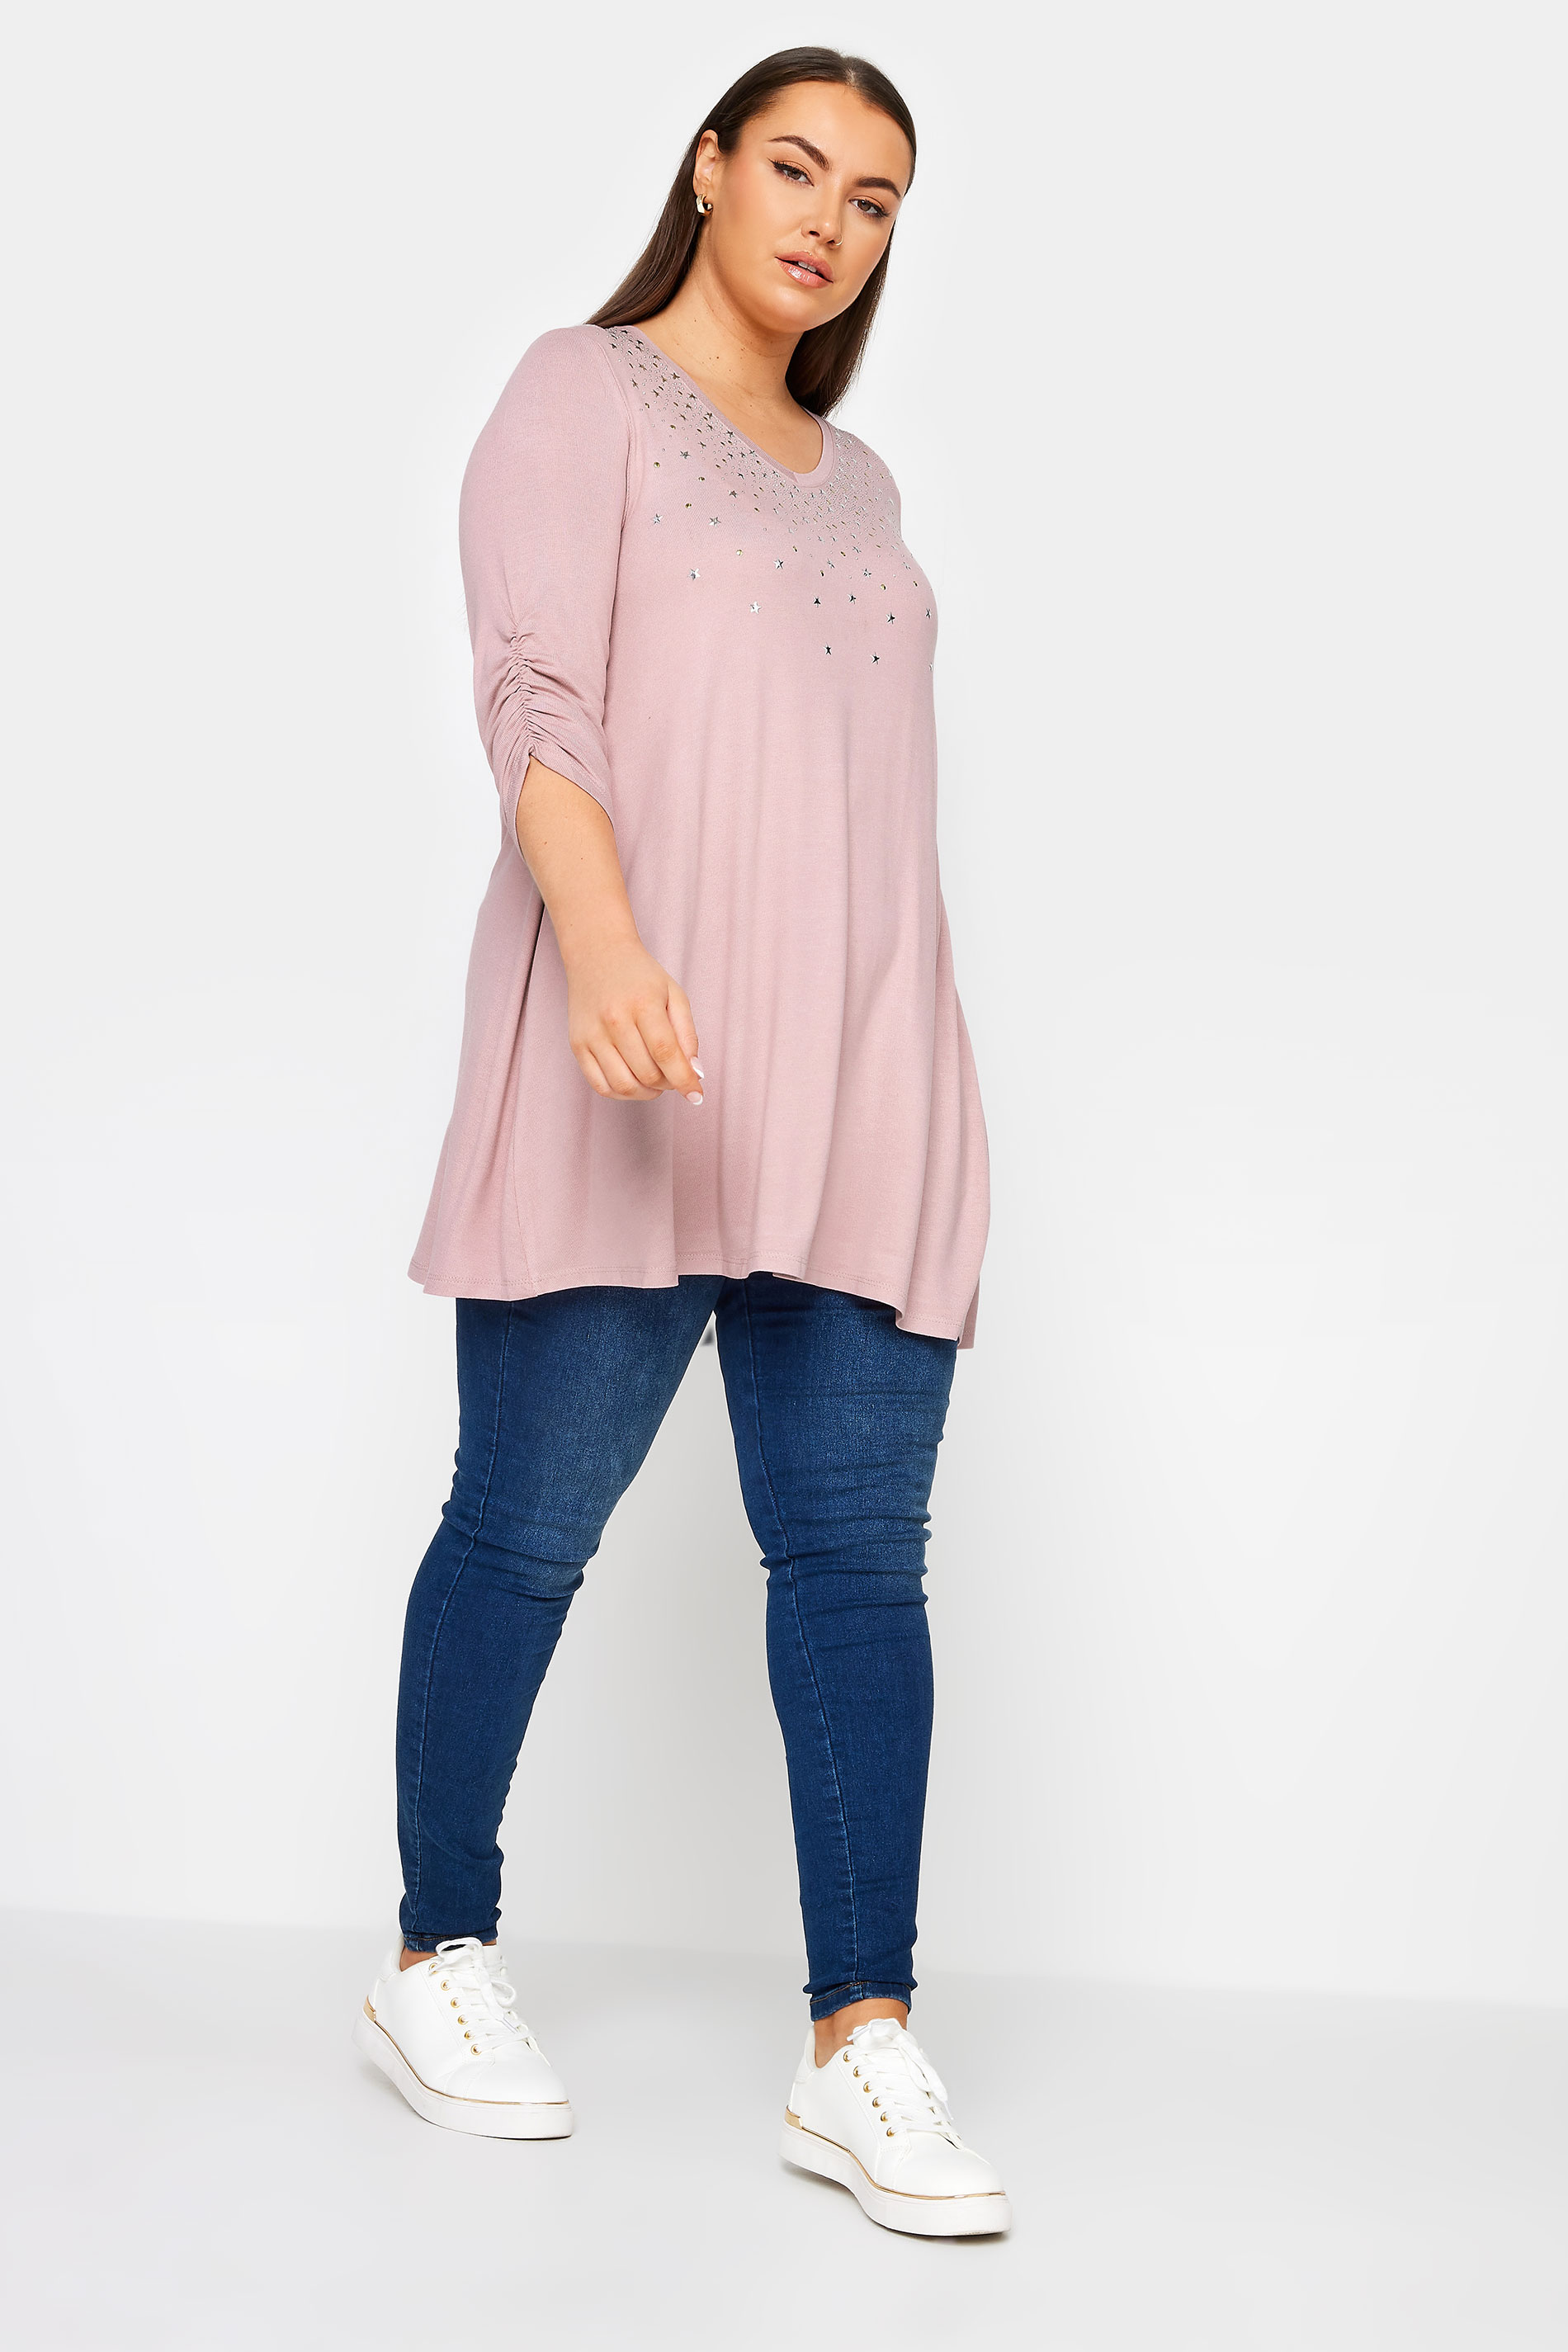 YOURS Plus Size Pink Star Embellished Swing Top | Yours Clothing 2